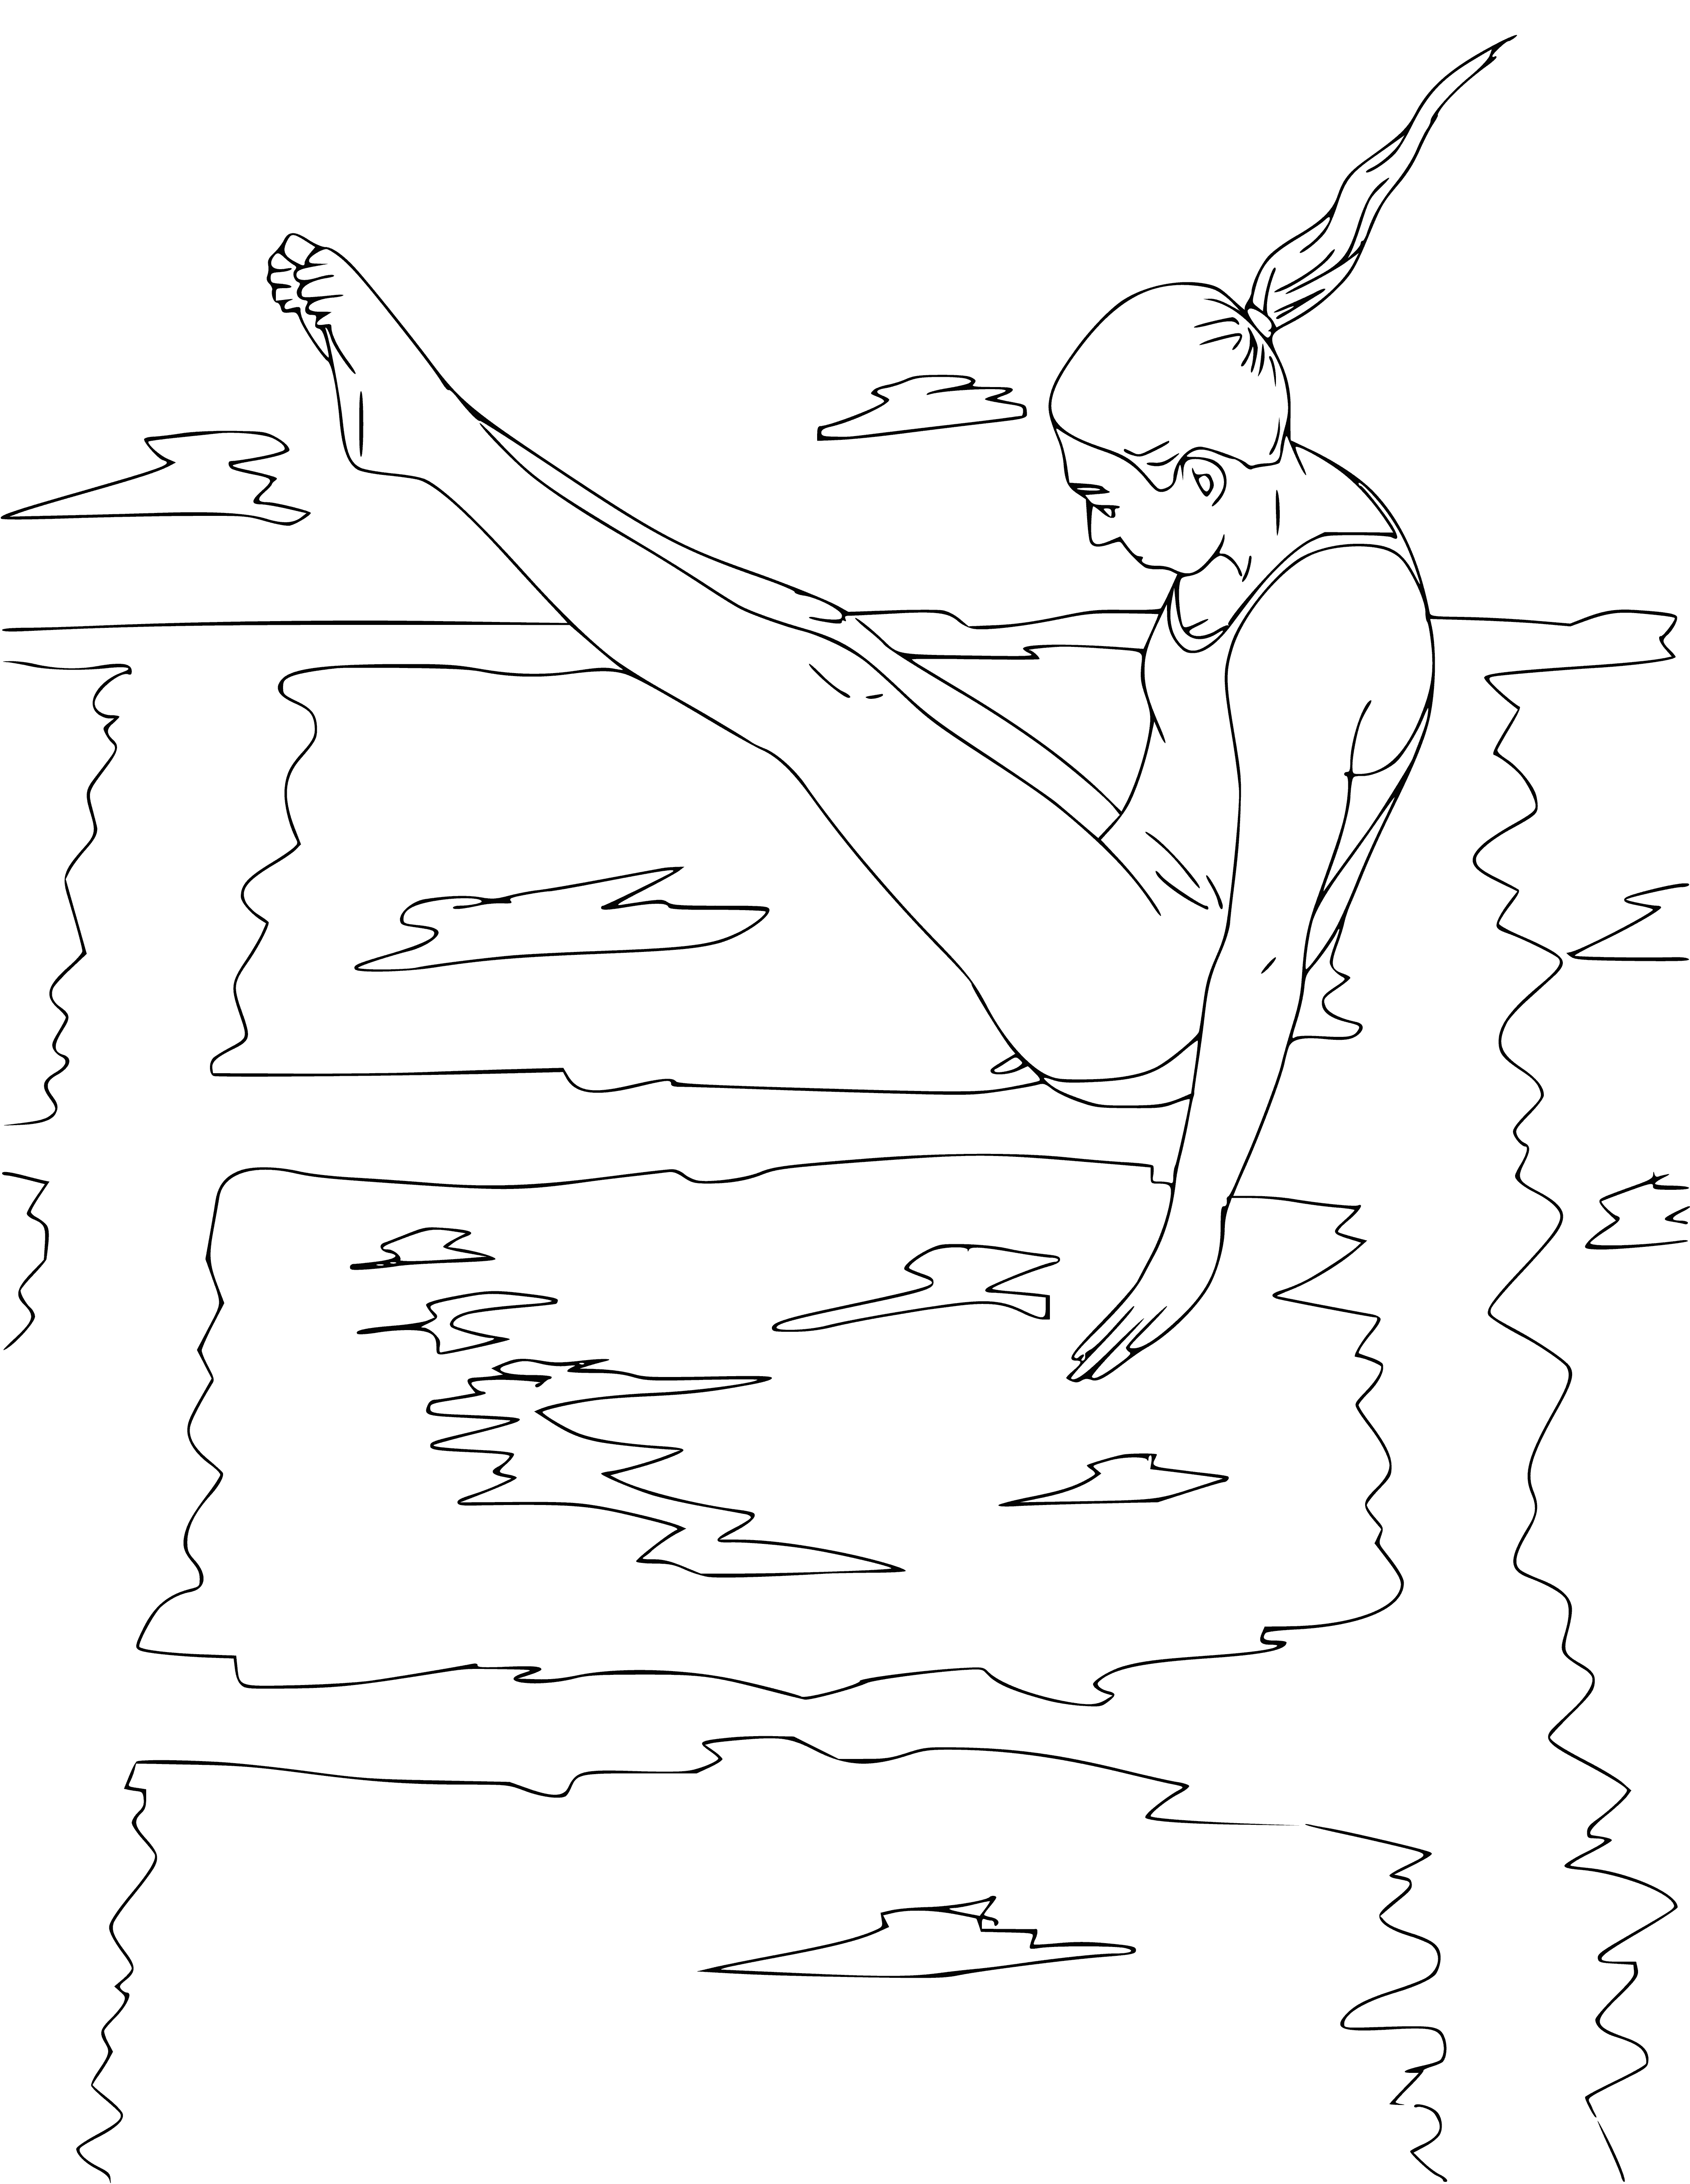 coloring page: #summervibes 

Person about to jump into pool on summer-themed coloring page. #summervibes